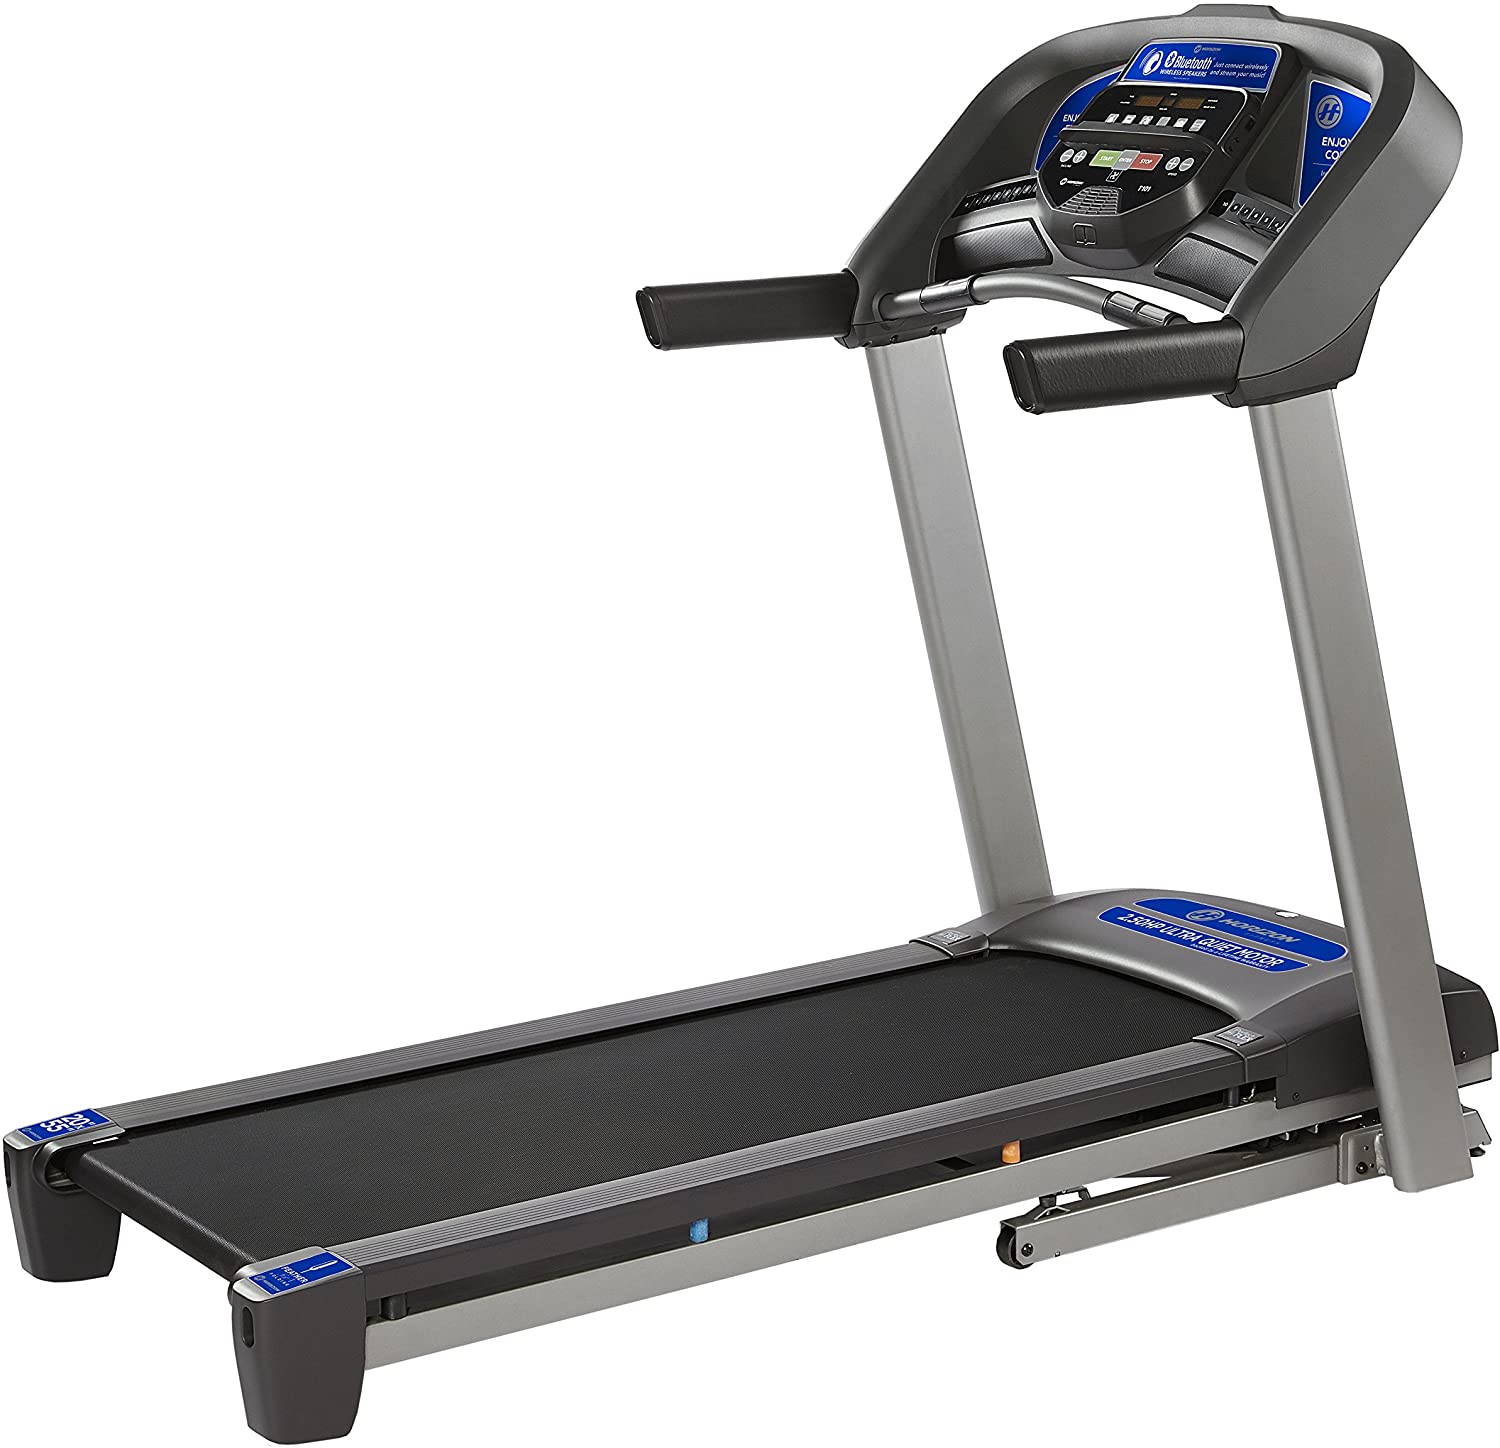 10 Best Folding Treadmills - Reviews & Buying Guide